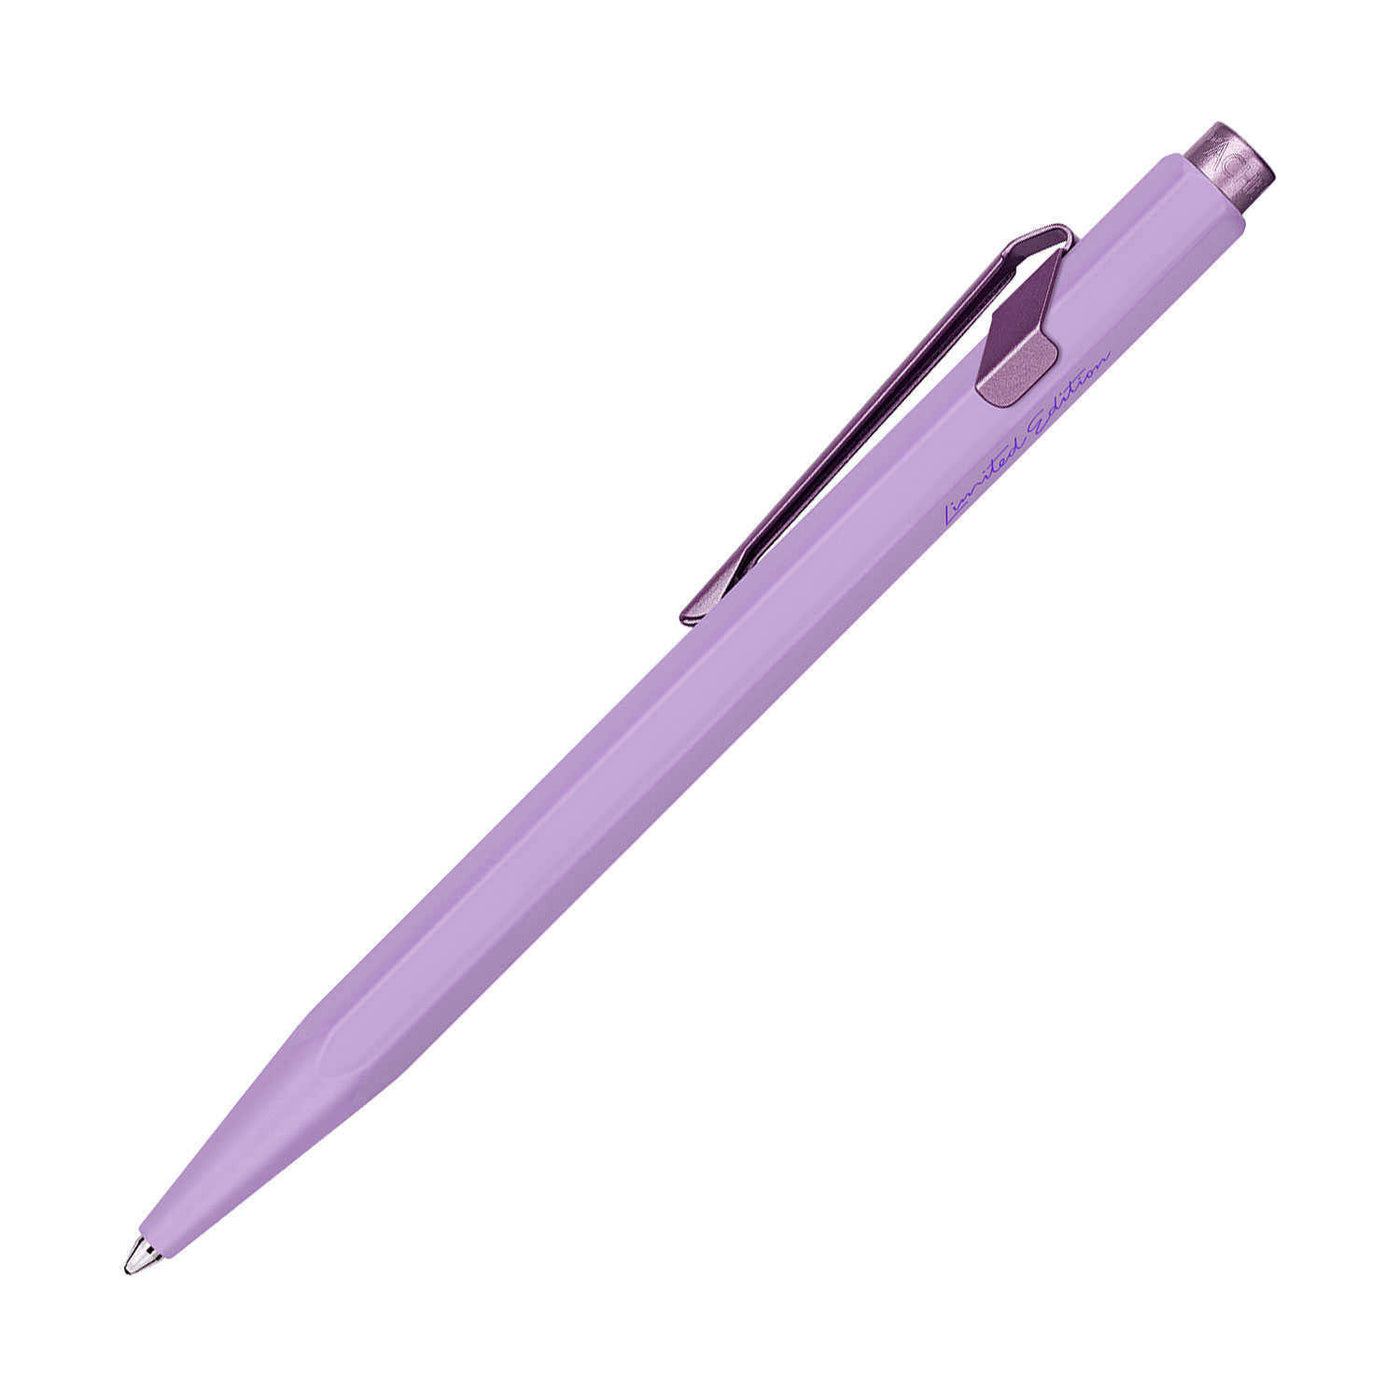 Caran d'Ache 849 Claim Your Style Ball Pen - Violet (Limited Edition) 3